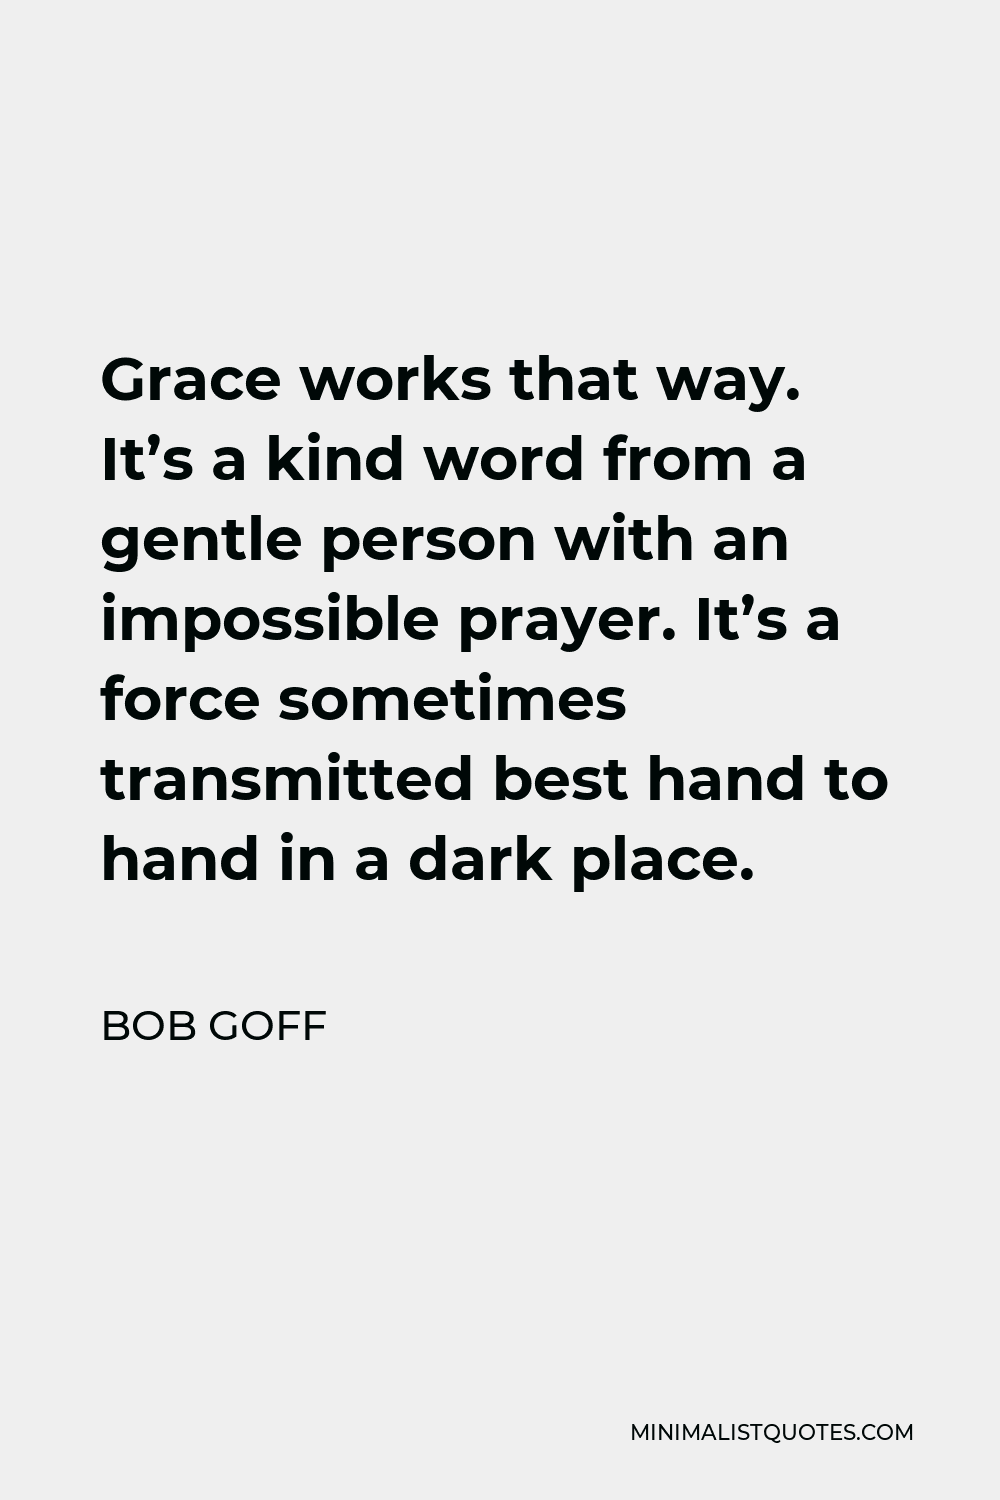 Bob Goff Quote - Grace works that way. It’s a kind word from a gentle person with an impossible prayer. It’s a force sometimes transmitted best hand to hand in a dark place.